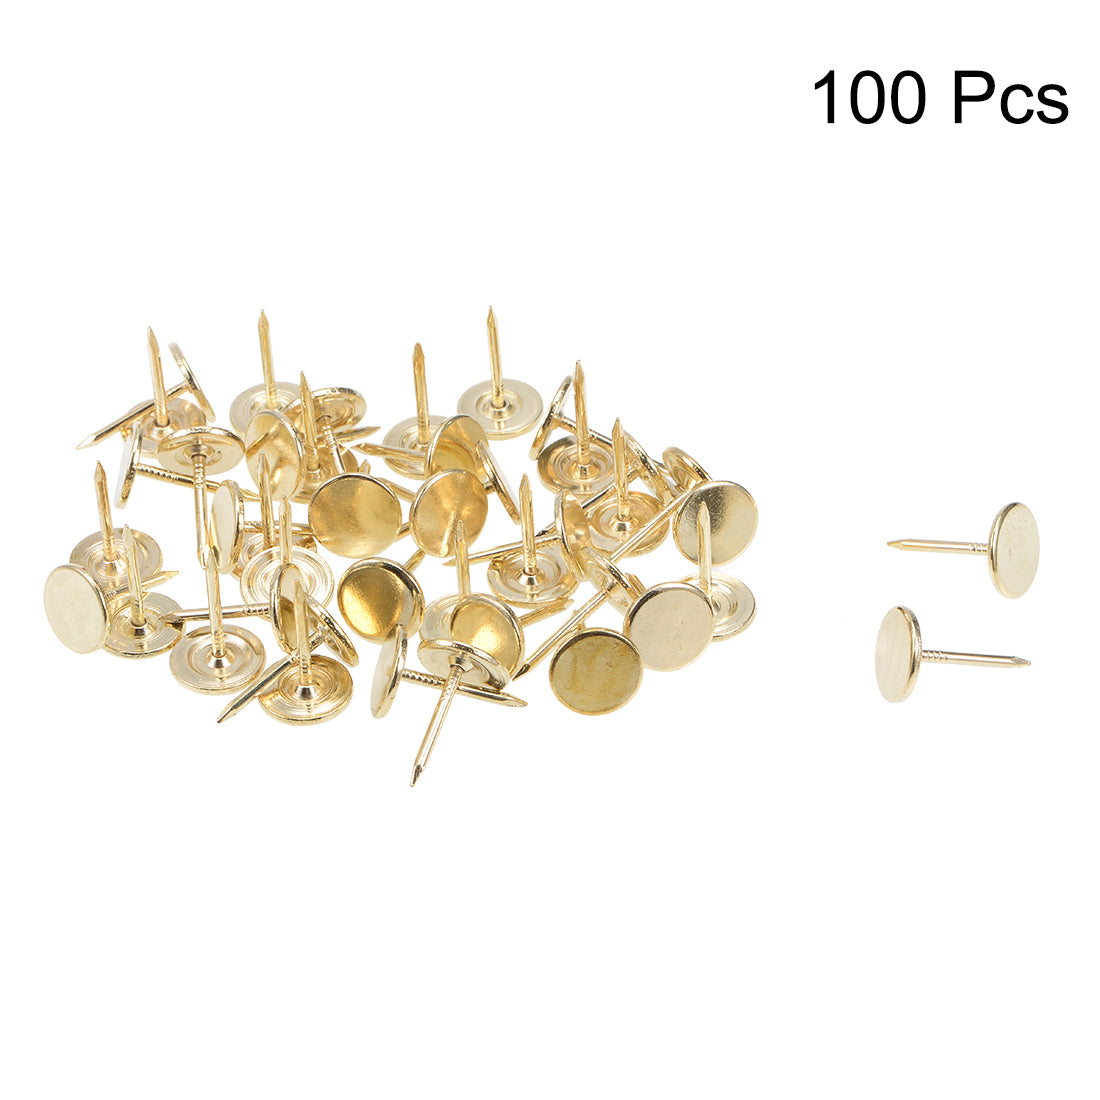 uxcell Uxcell Upholstery Nails Tacks 19mmx30mm Flat Head Furniture Nails Gold Tone 100 Pcs